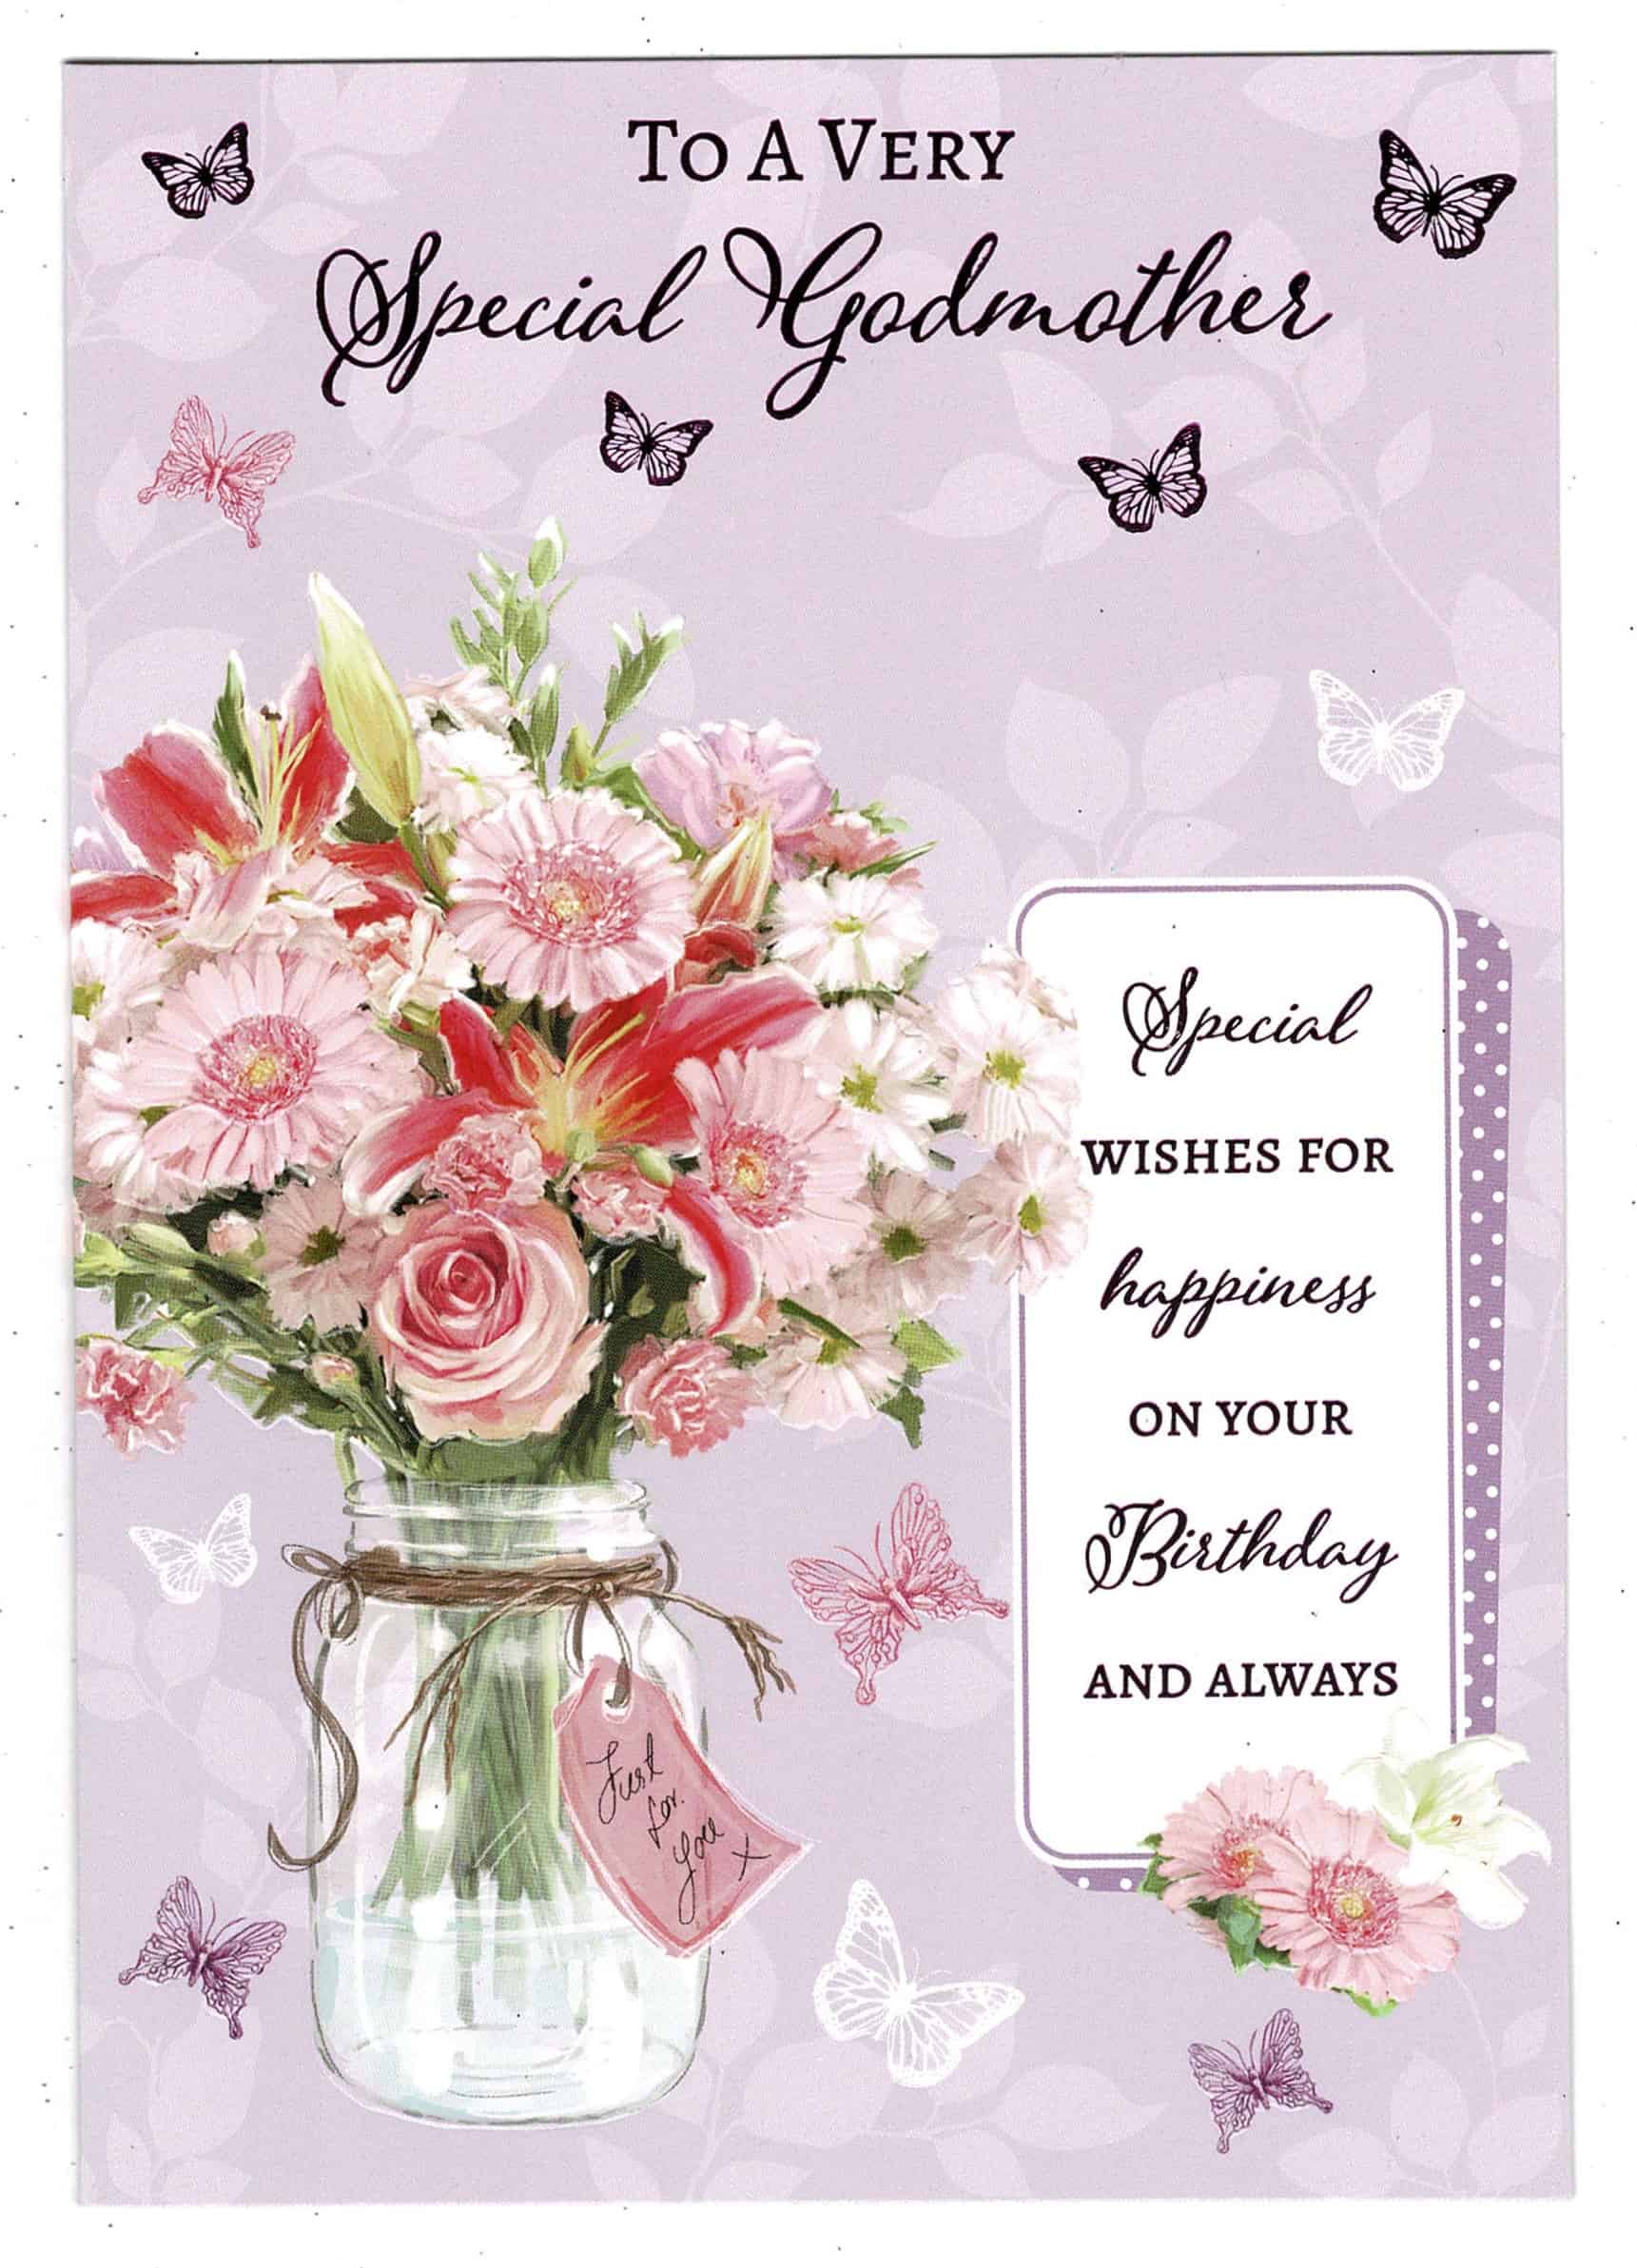 godmother-birthday-card-to-a-very-special-godmother-on-your-birthday